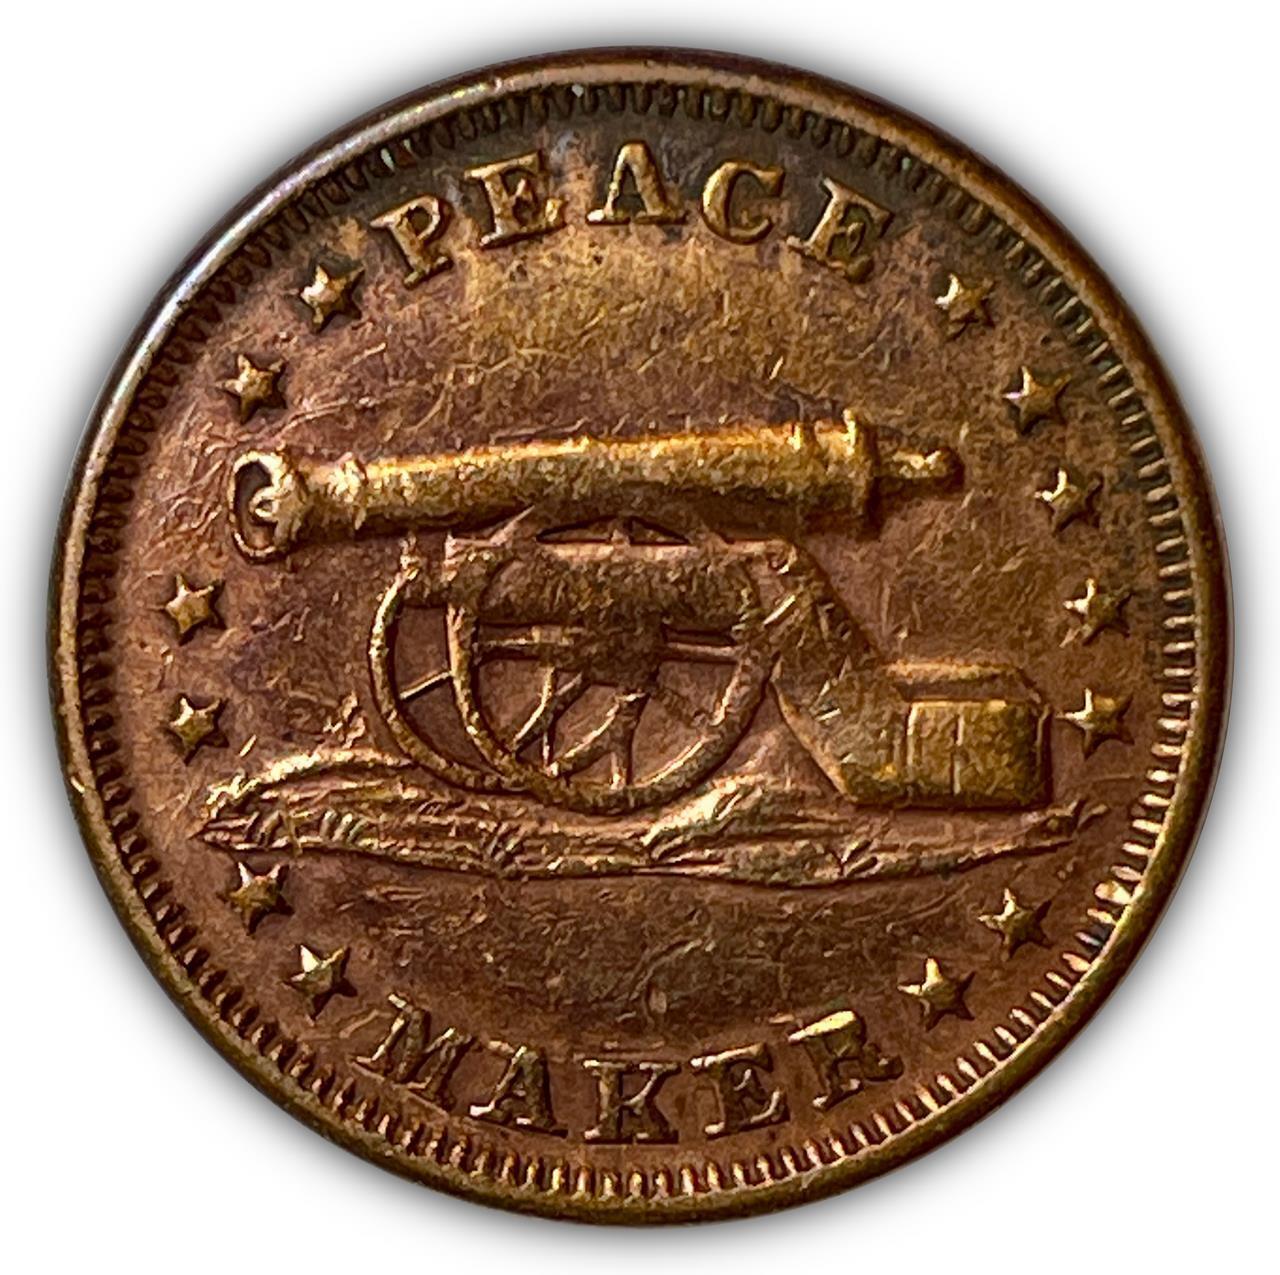 1863 Peace Maker Stand By The Flag Patriotic Civil War Token XF Coin #5931